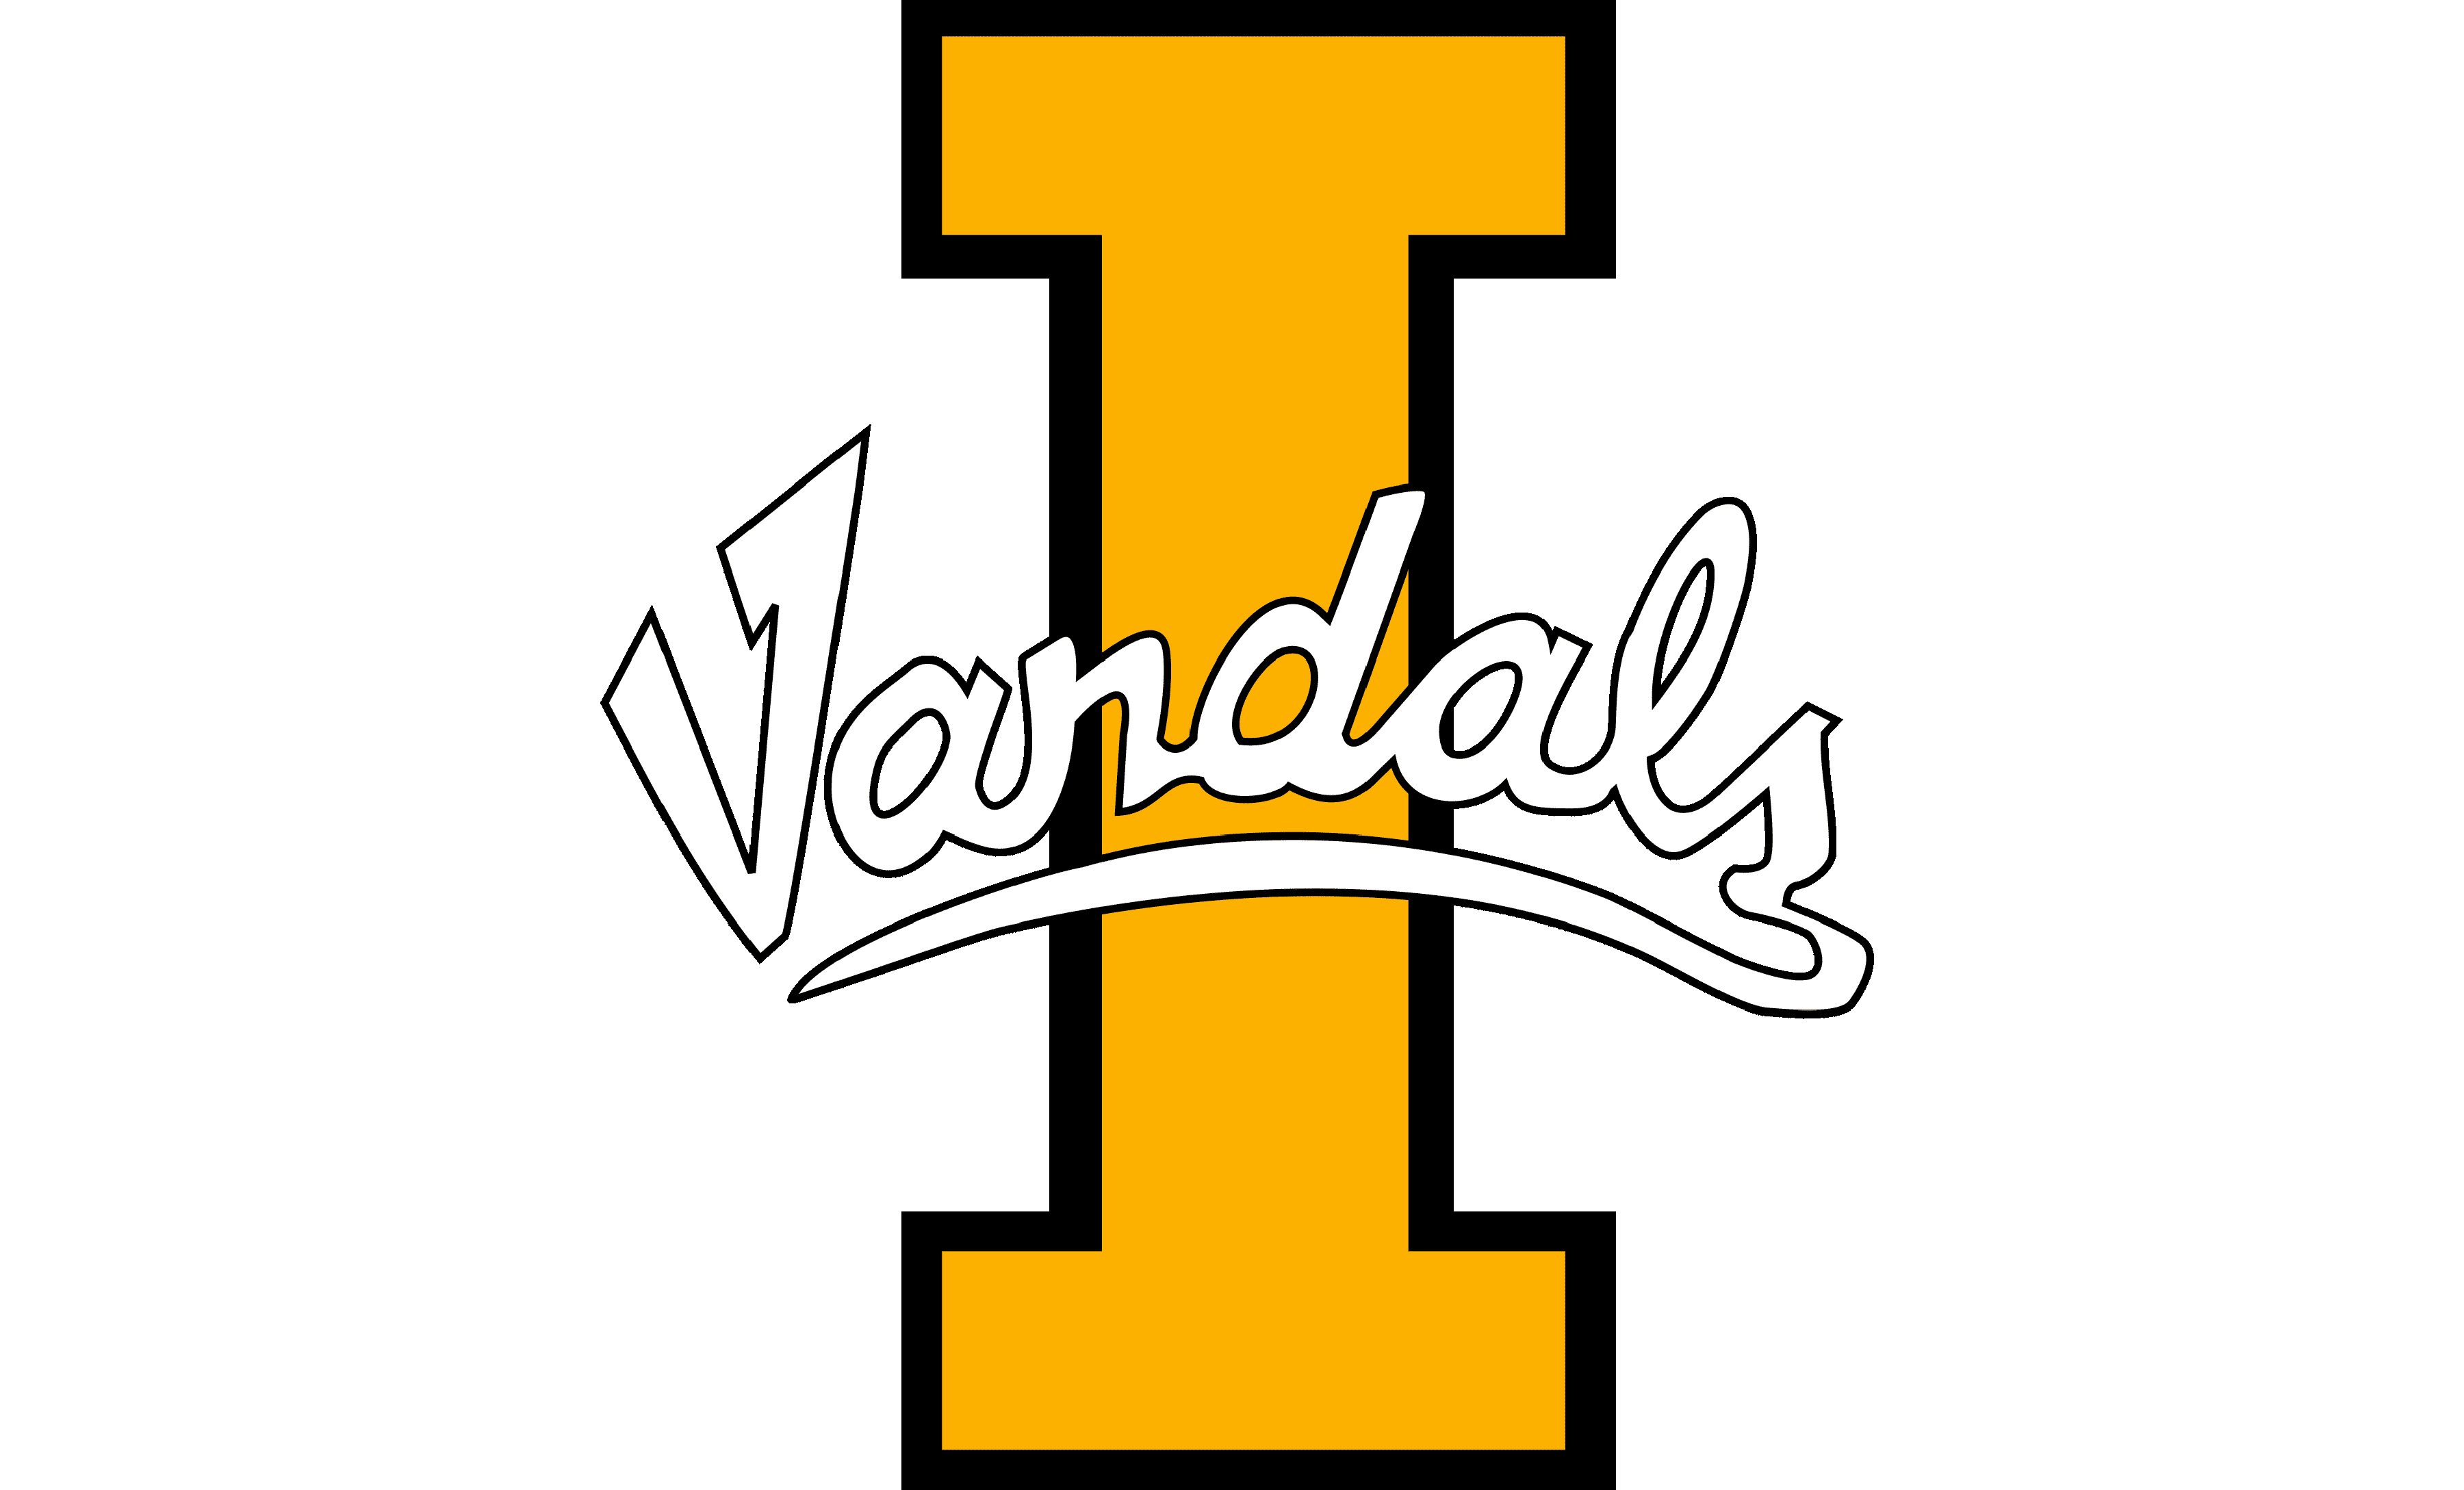 Idaho Vandals Logo and symbol, meaning, history, PNG, brand